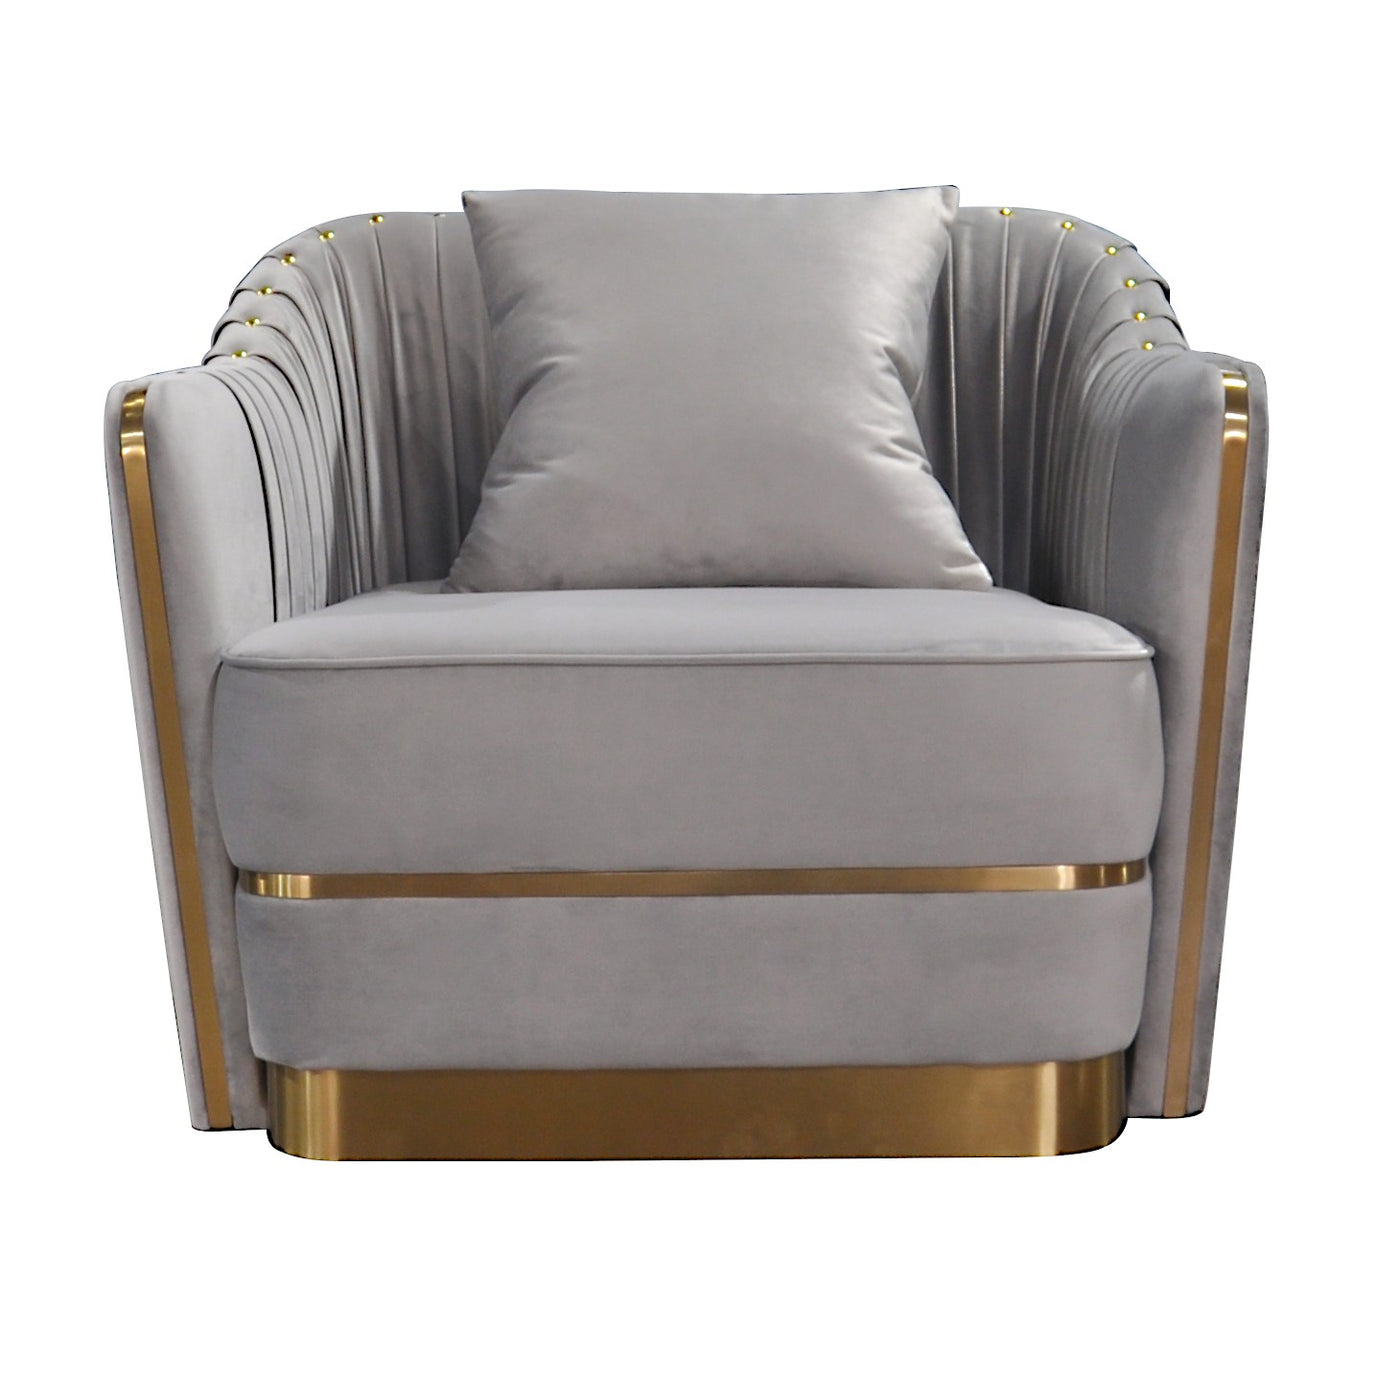 Stallone Chair Grey